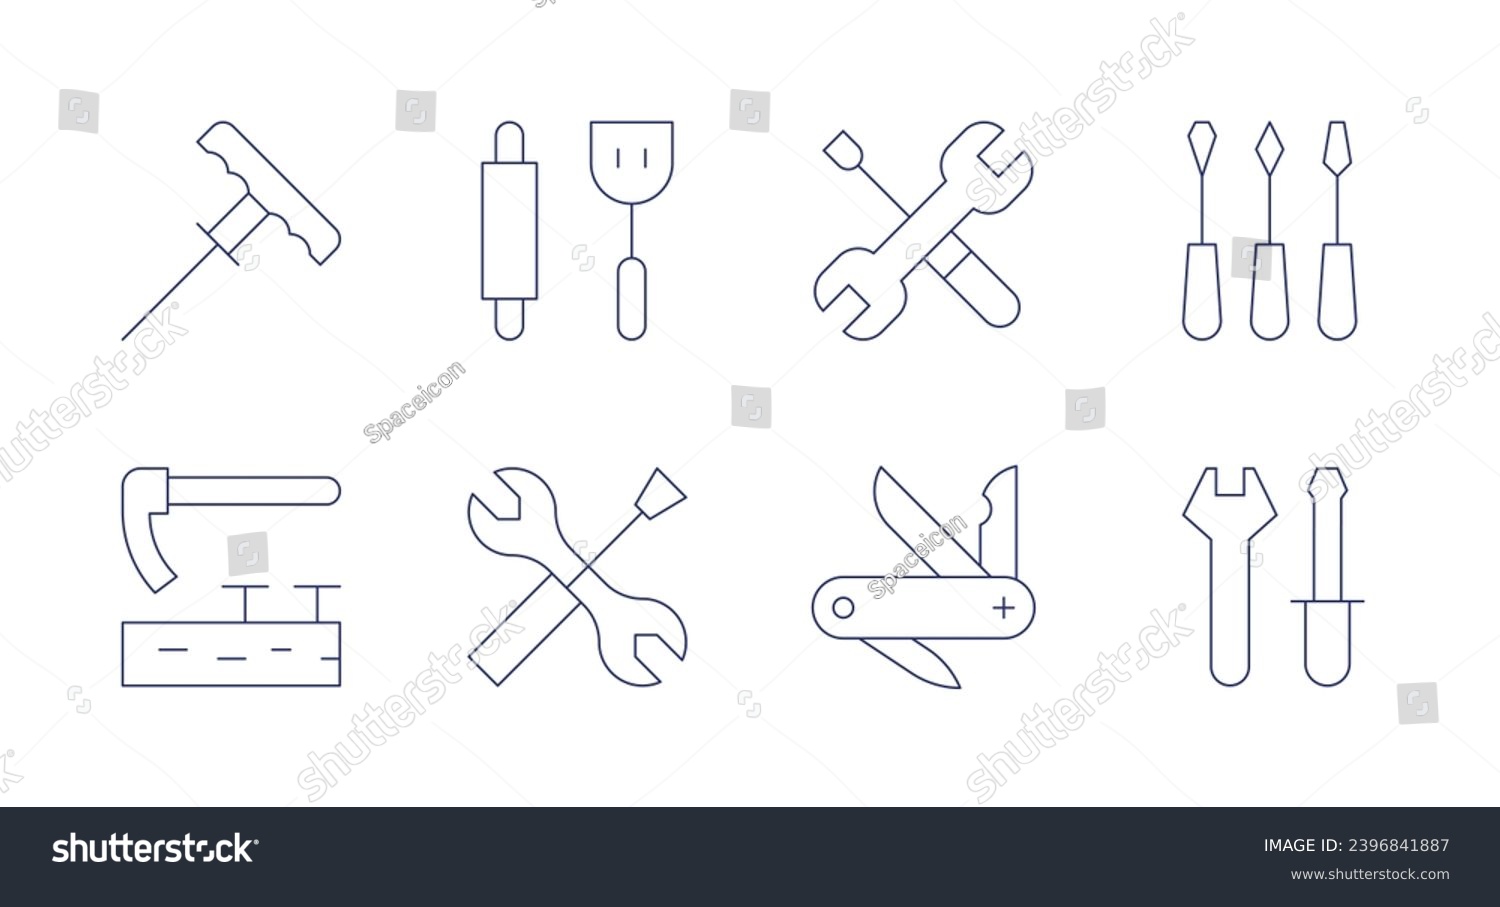 SVG of Tools icons. Editable stroke. Containing plugger, adze, kitchen tools, tools, swiss army knife, wrench, screwdriver. svg